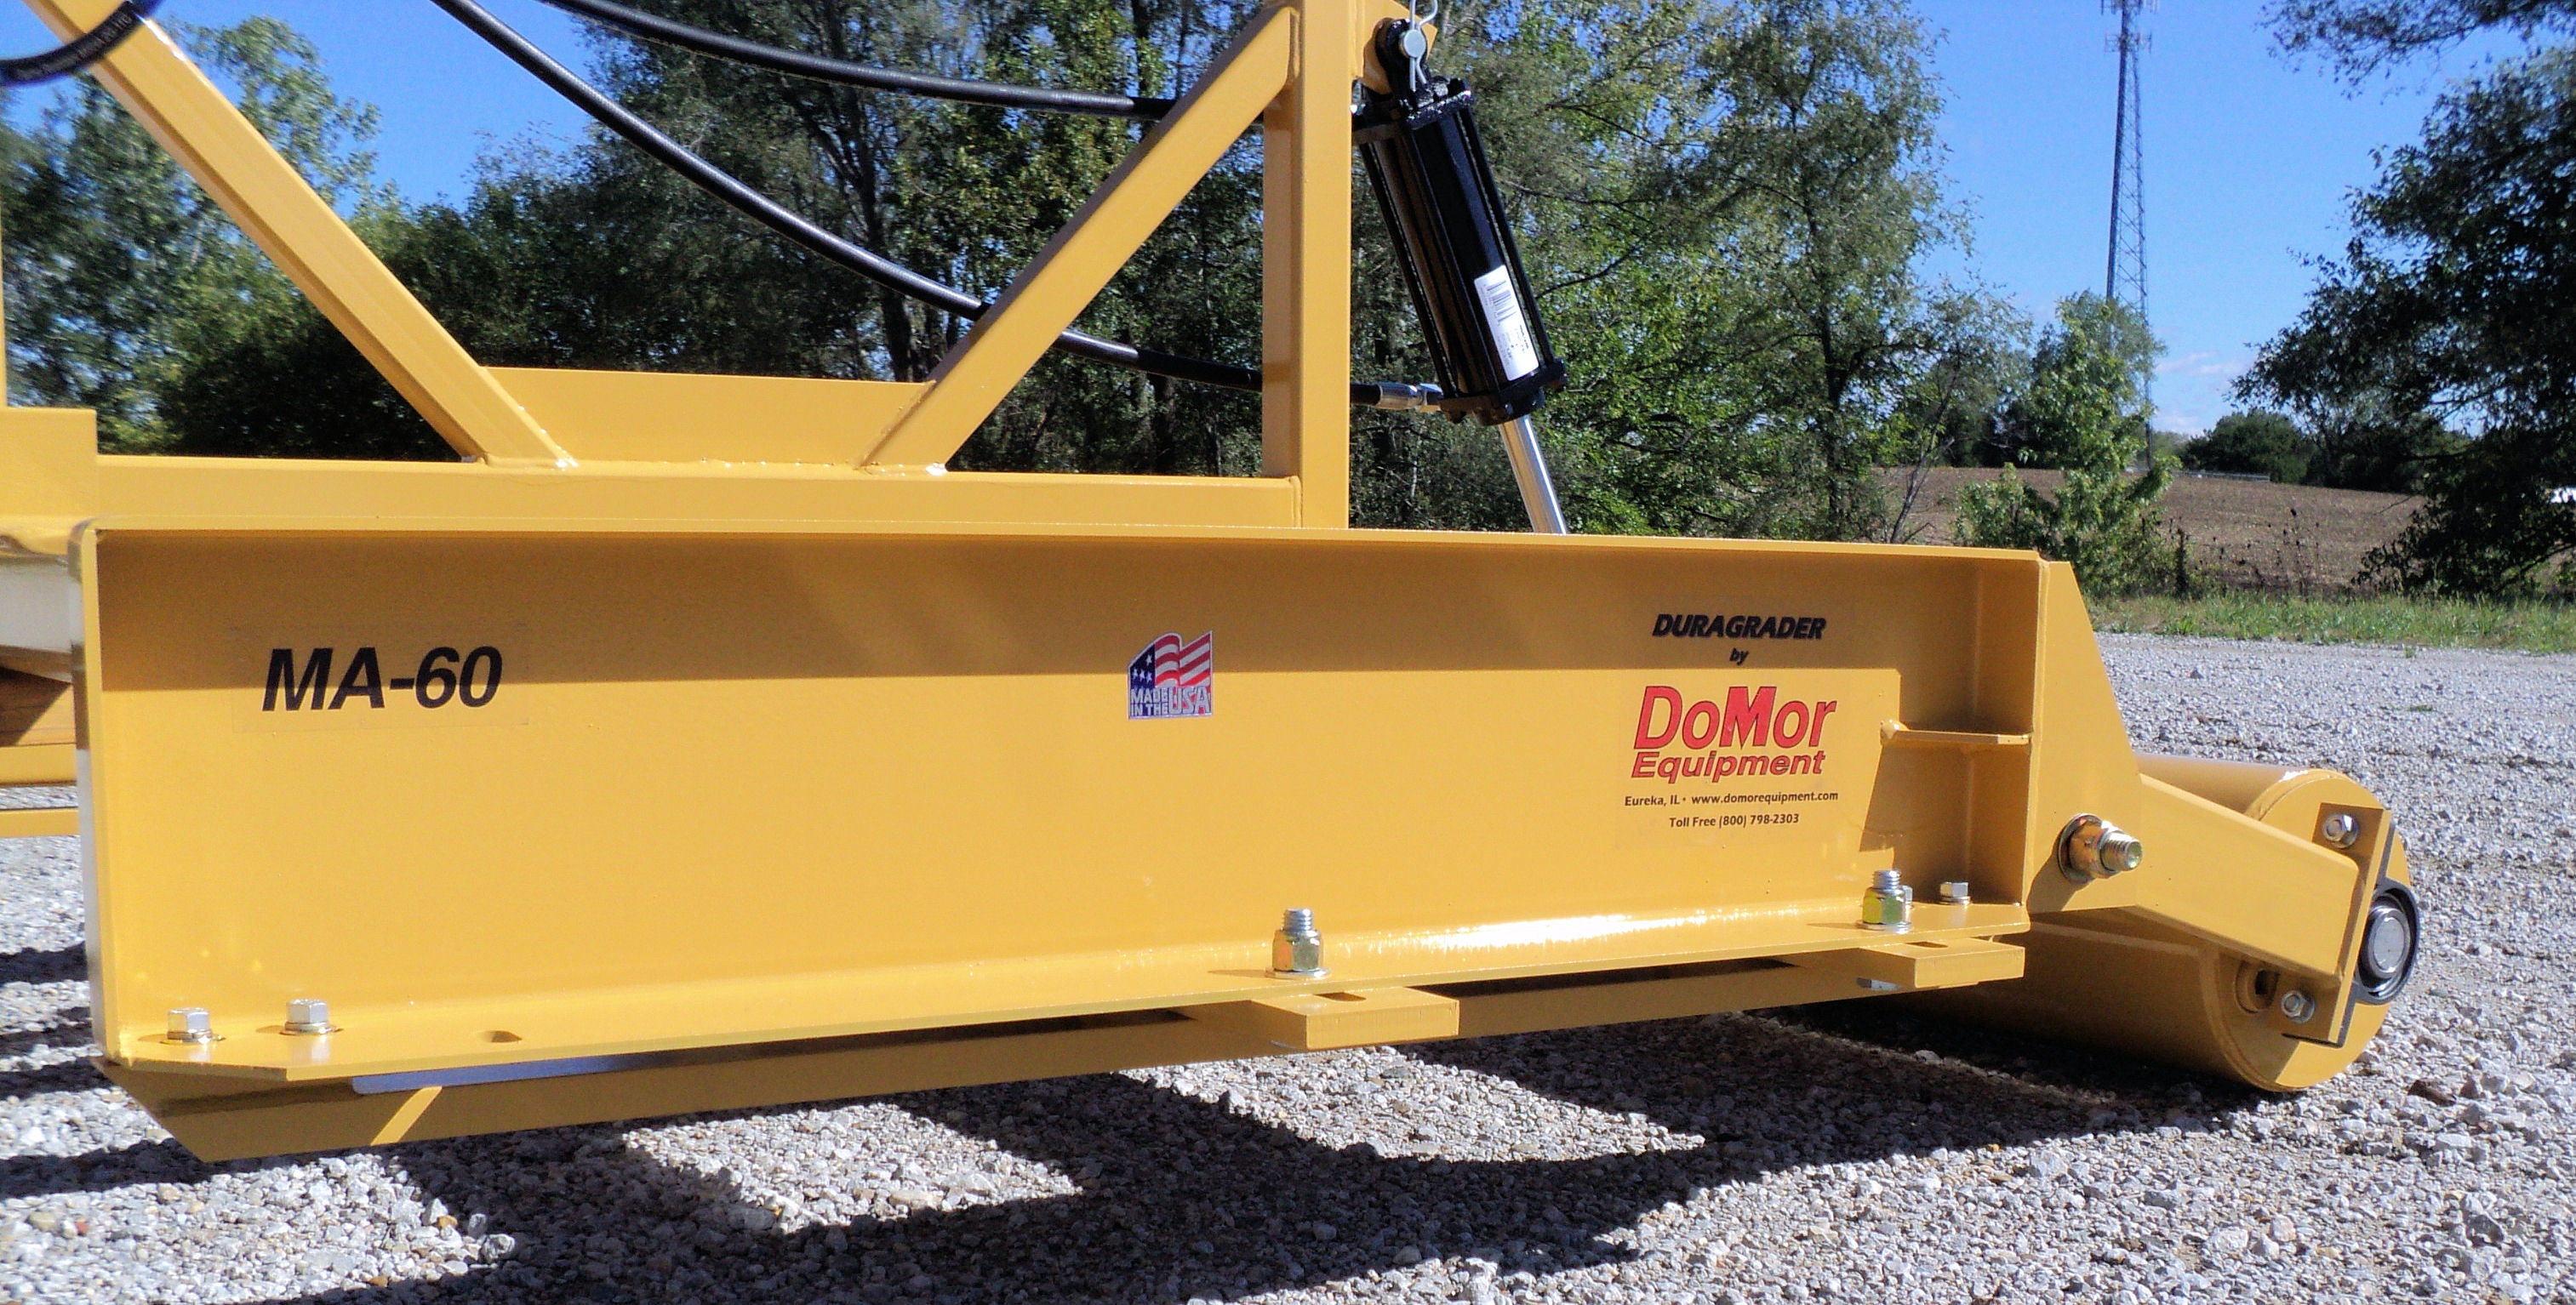 The Roller/Packer Attachment is able to be filled with water or sand for added weight when compacting of lose material is desired. The hydraulics allow for the weight of the entire unit to ride on the smooth drum to also give the nominal weight.